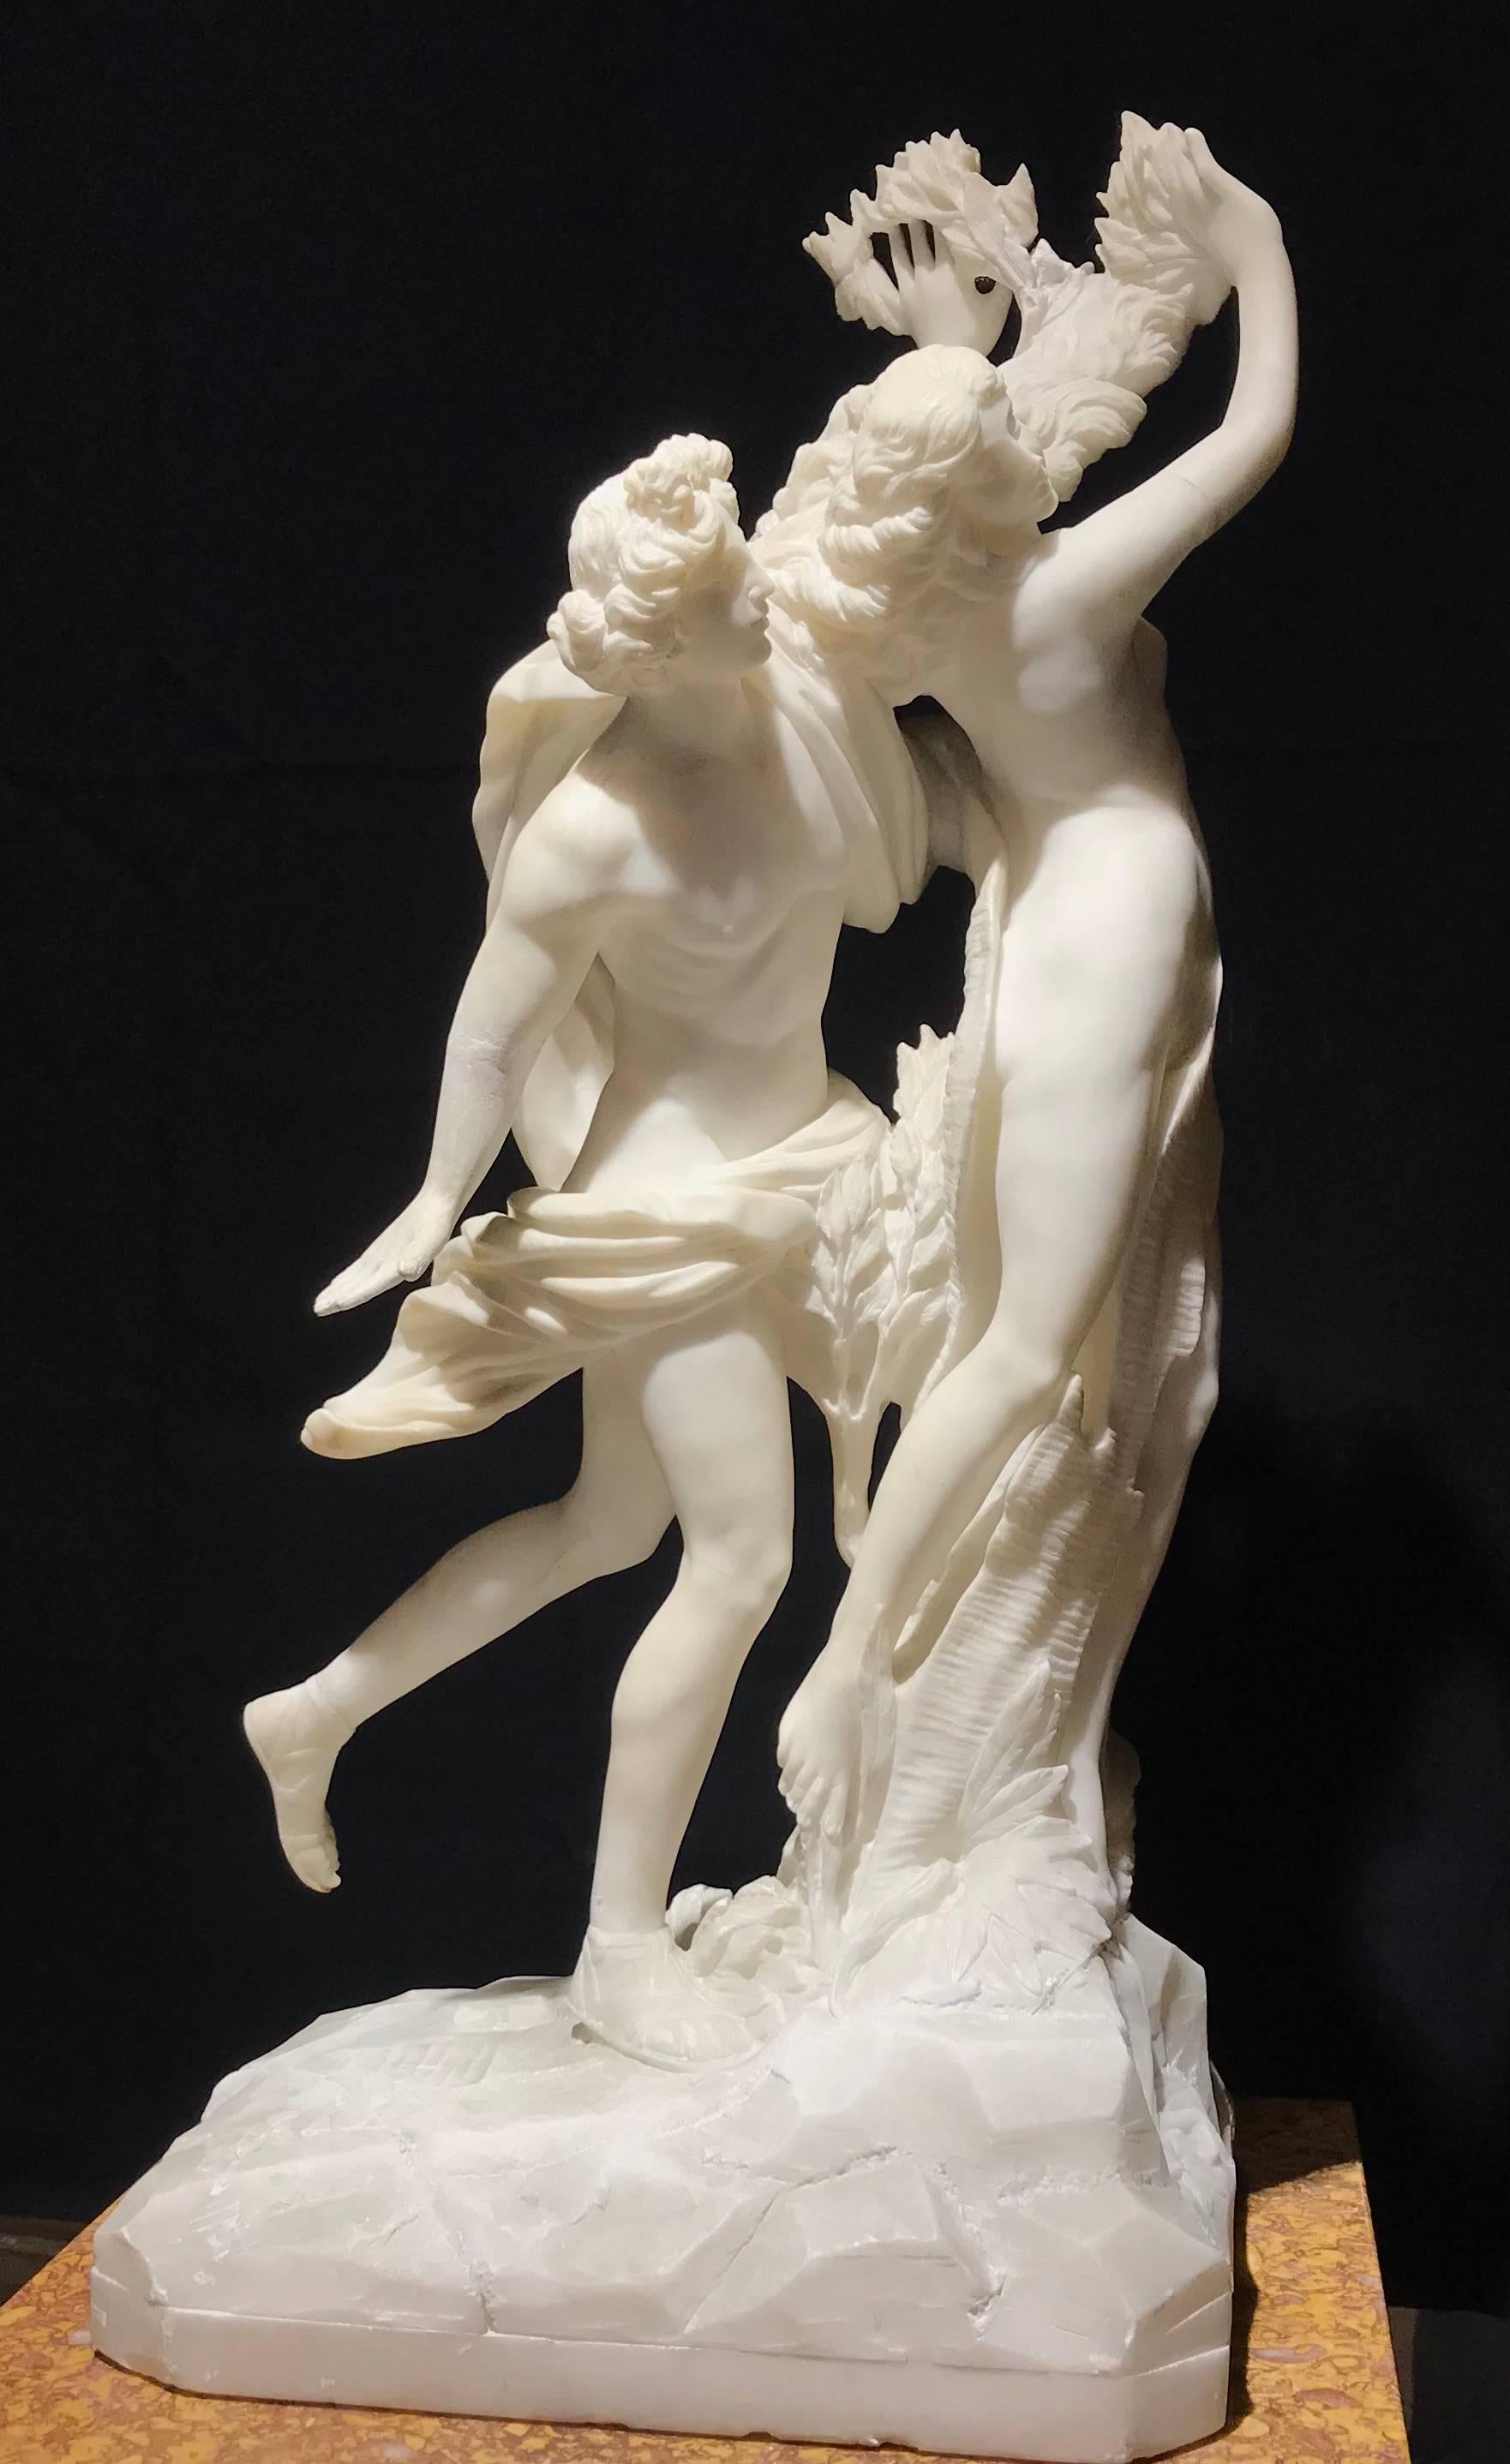 The sculpture was the last of a number of artworks commissioned by Cardinal Scipione Borghese, early on in Bernini's career. Apollo and Daphne was commissioned after Borghese had given an earlier work of his patronage, Bernini's Pluto and